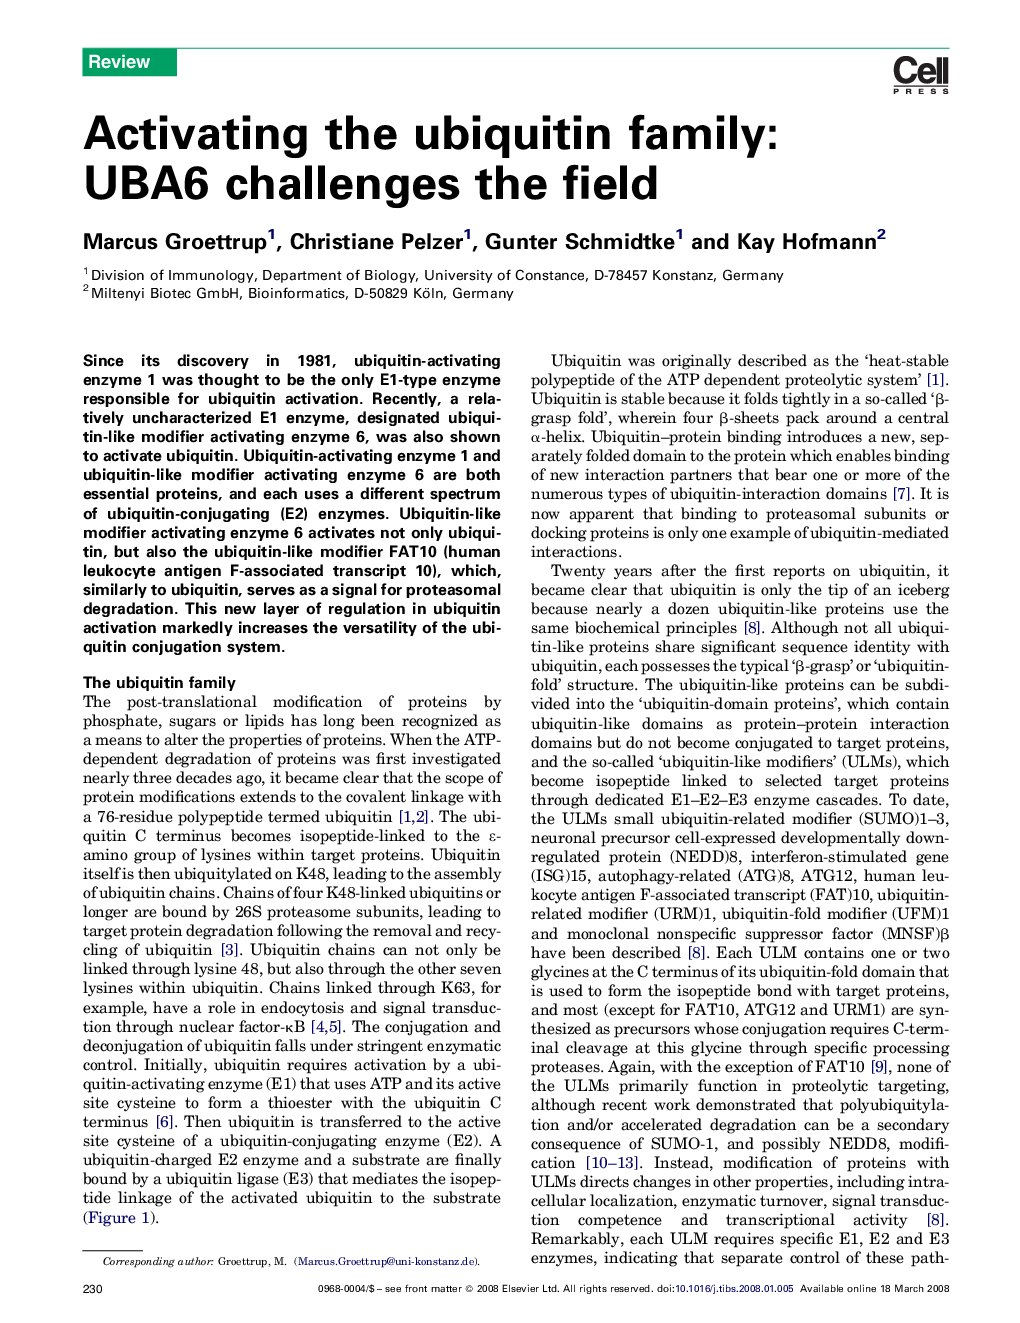 Activating the ubiquitin family: UBA6 challenges the field